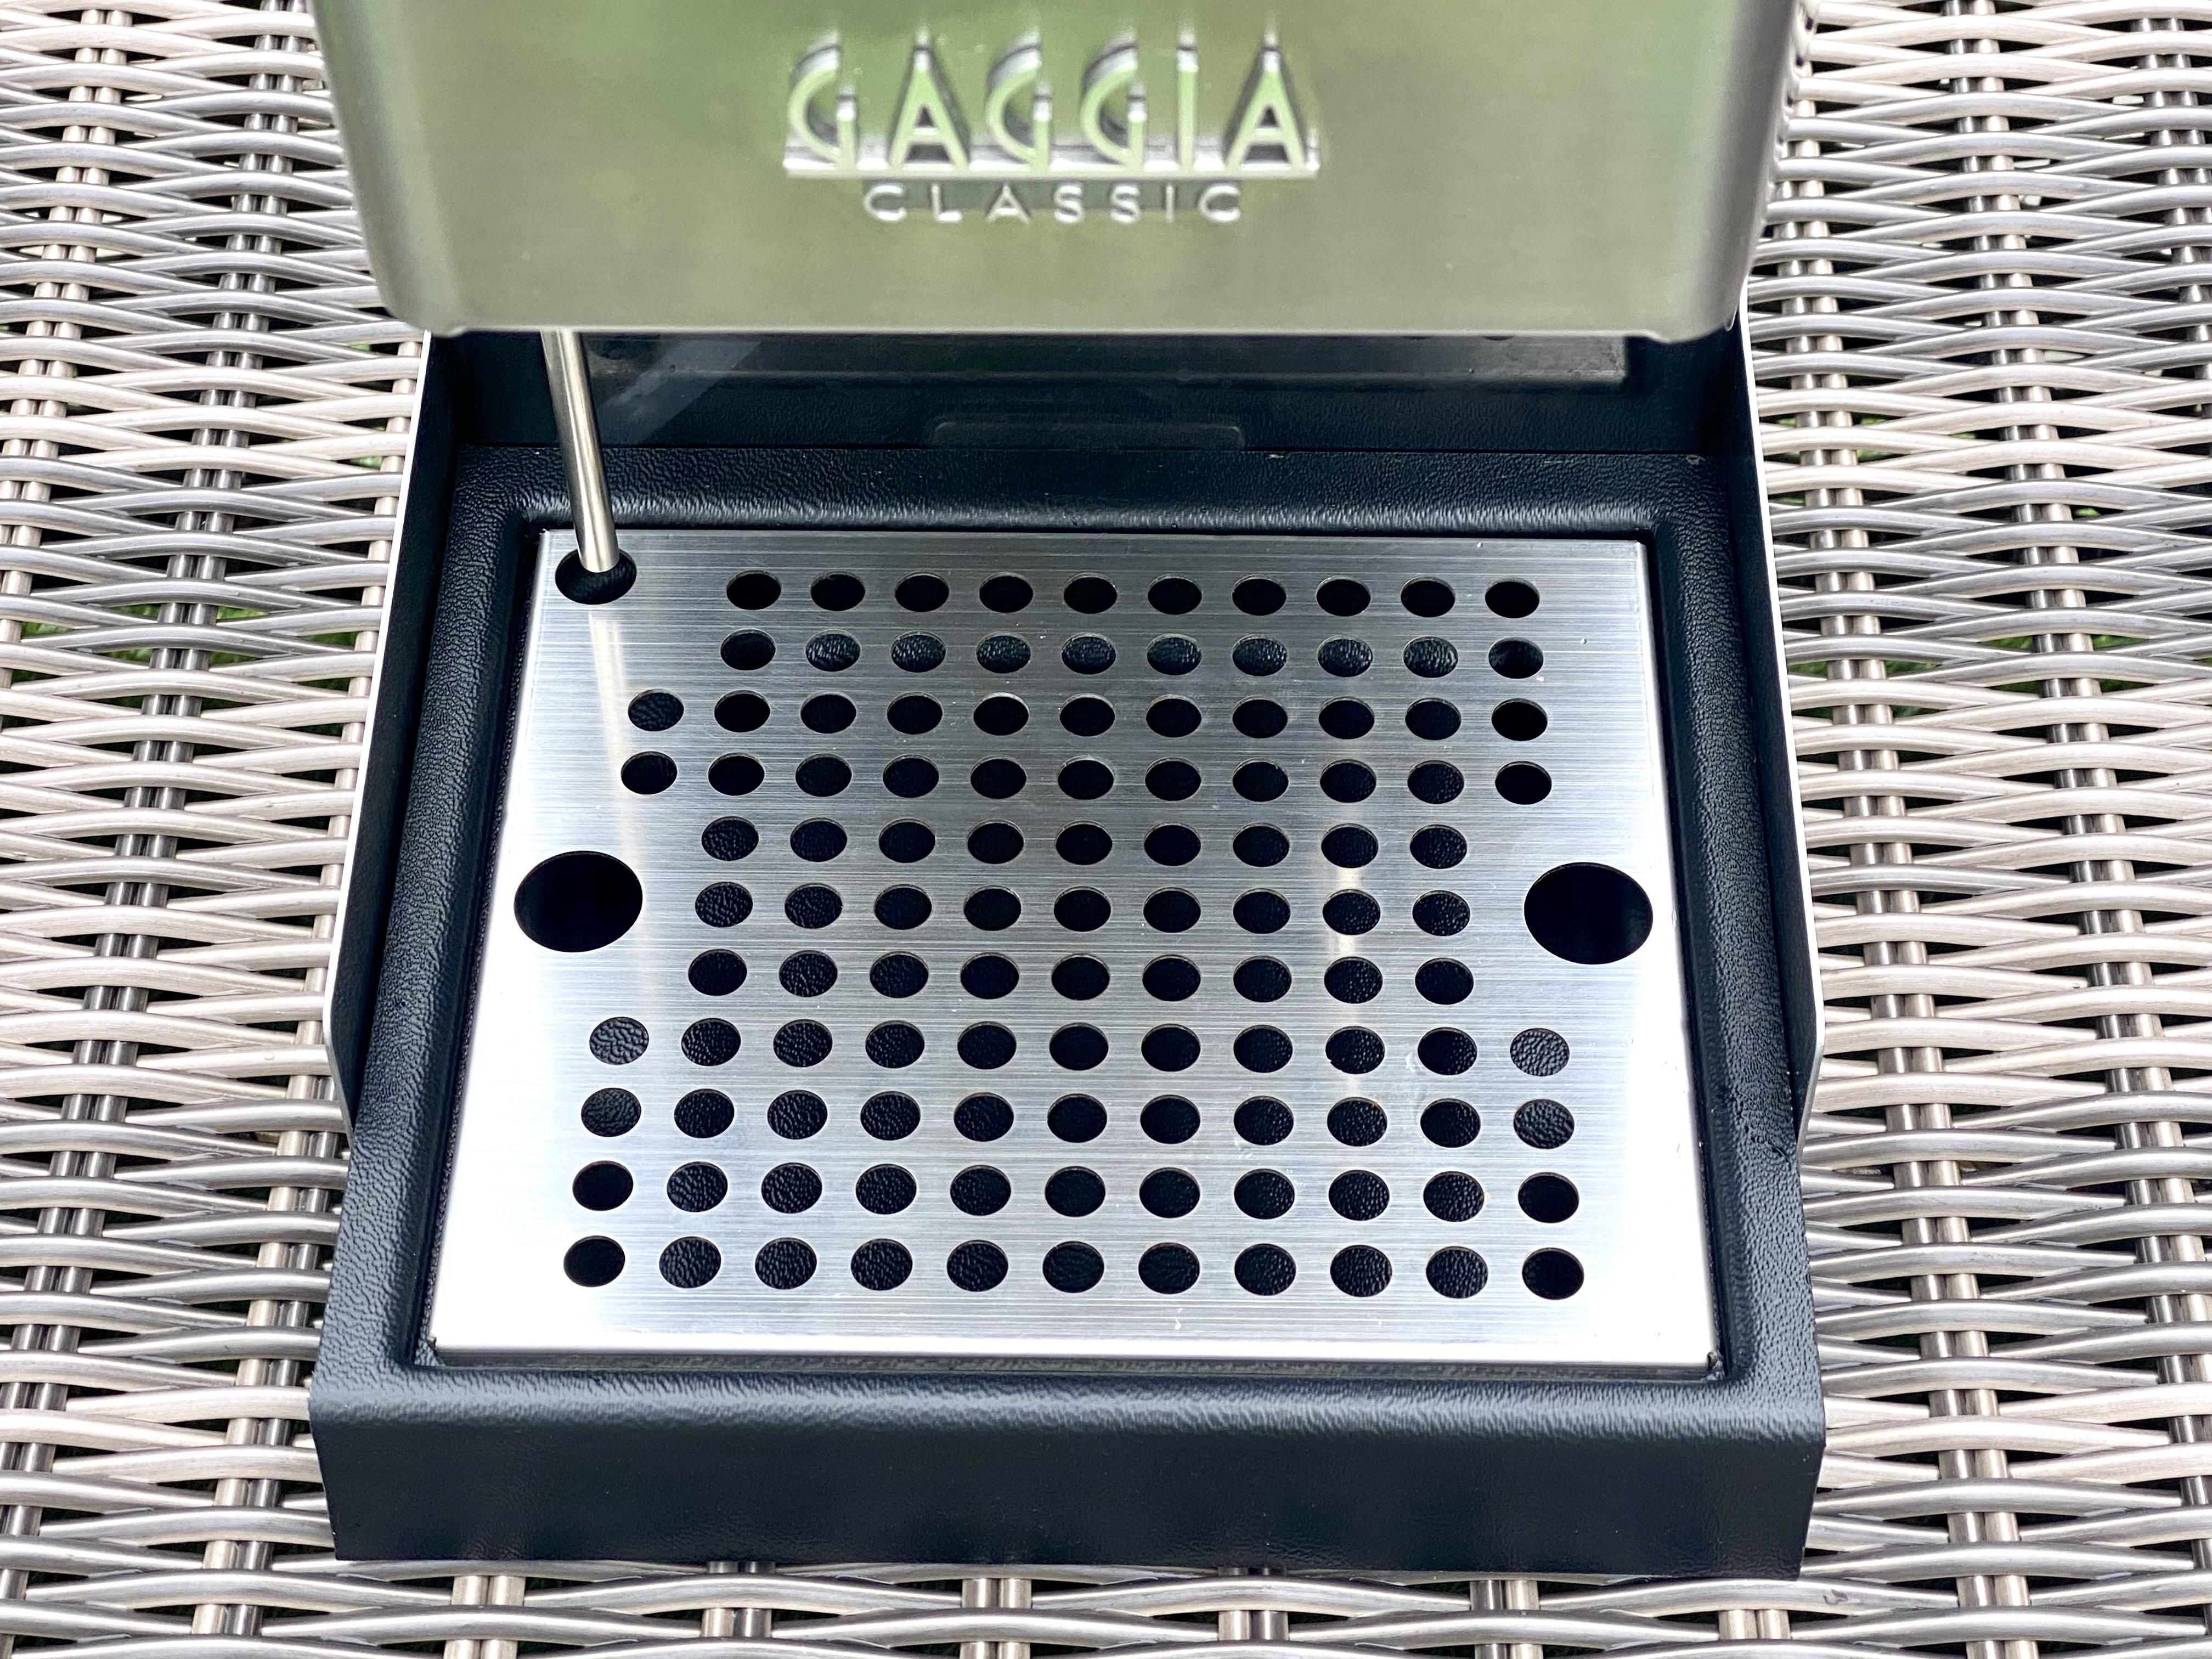 Extended MAX Drip tray with grate and tube installed